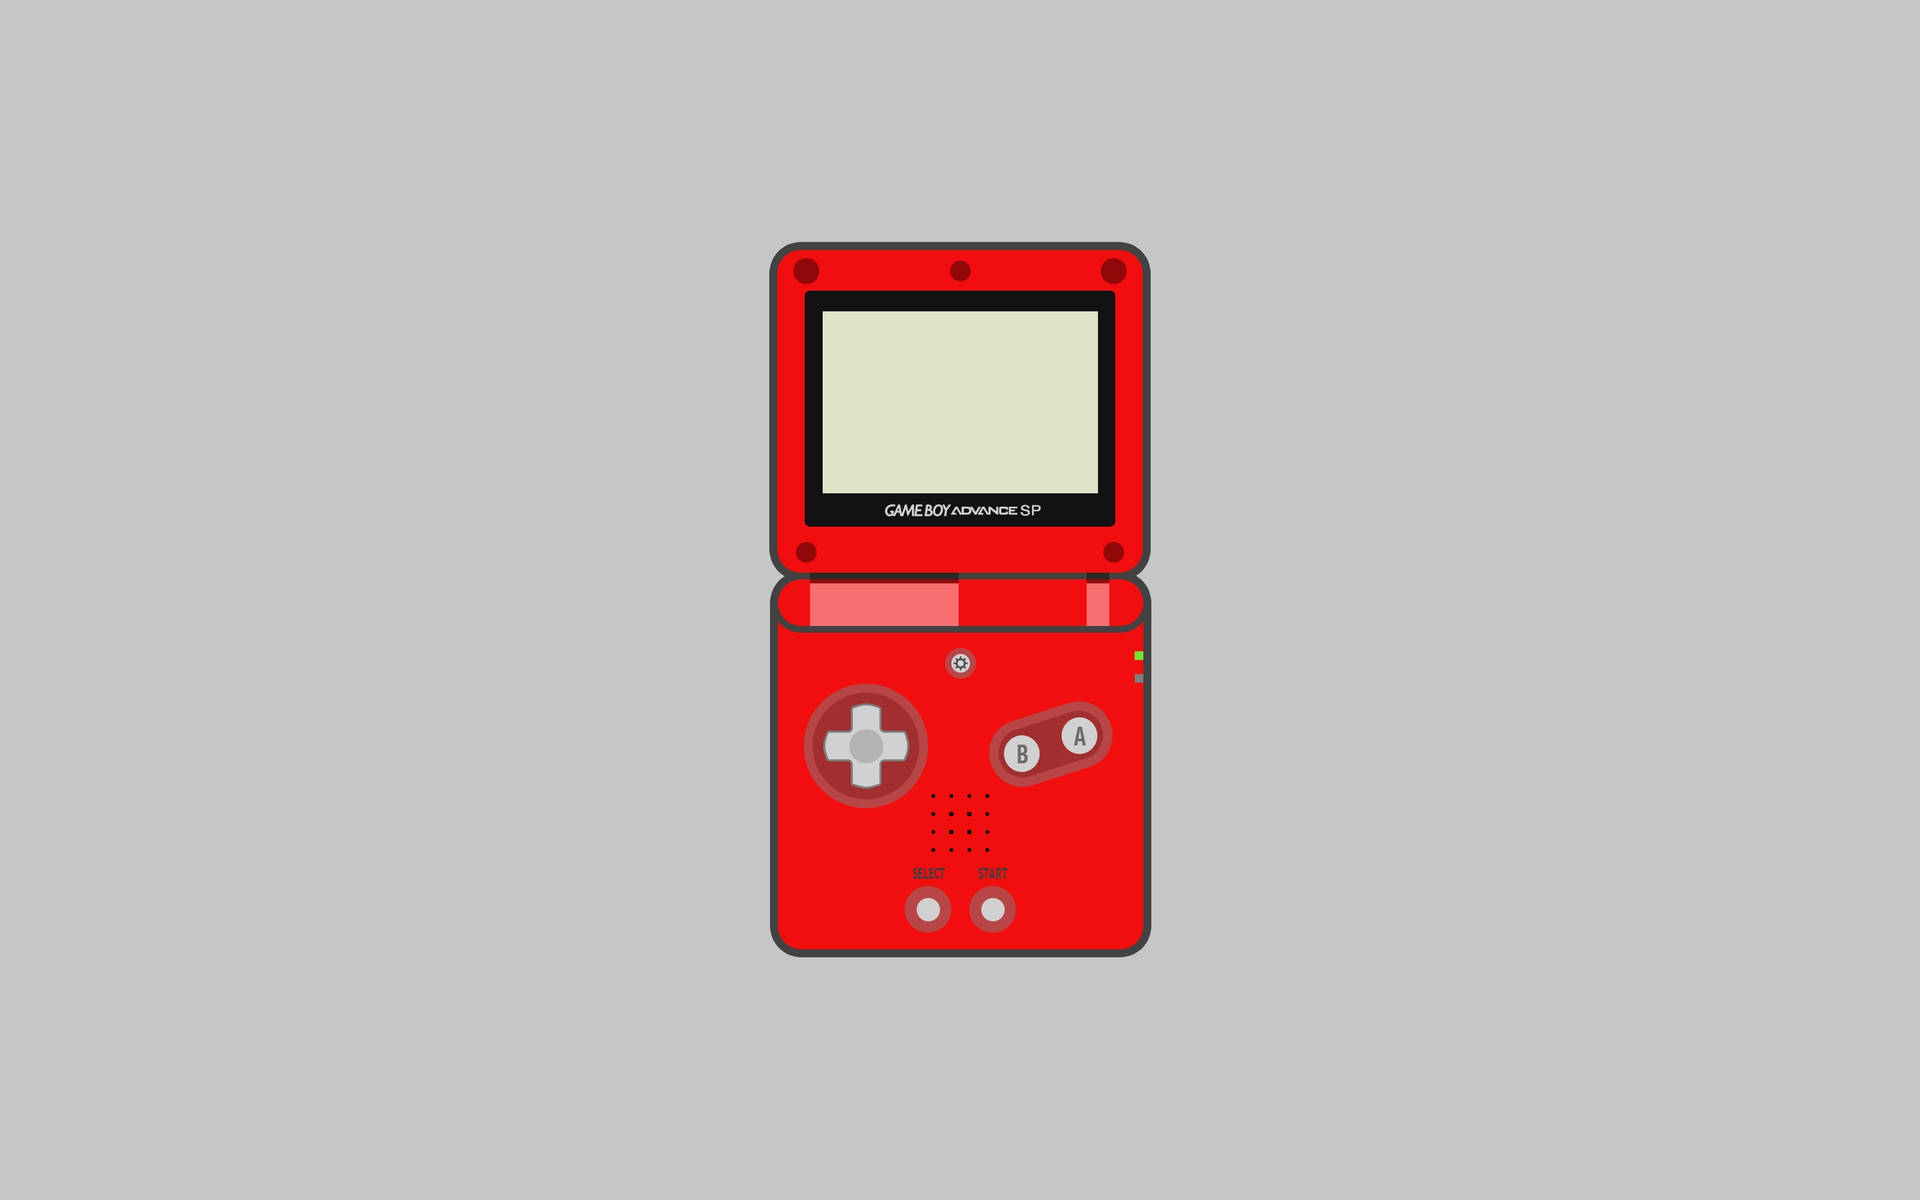 Simple Art Of Red Game Boy Advance Sp Background